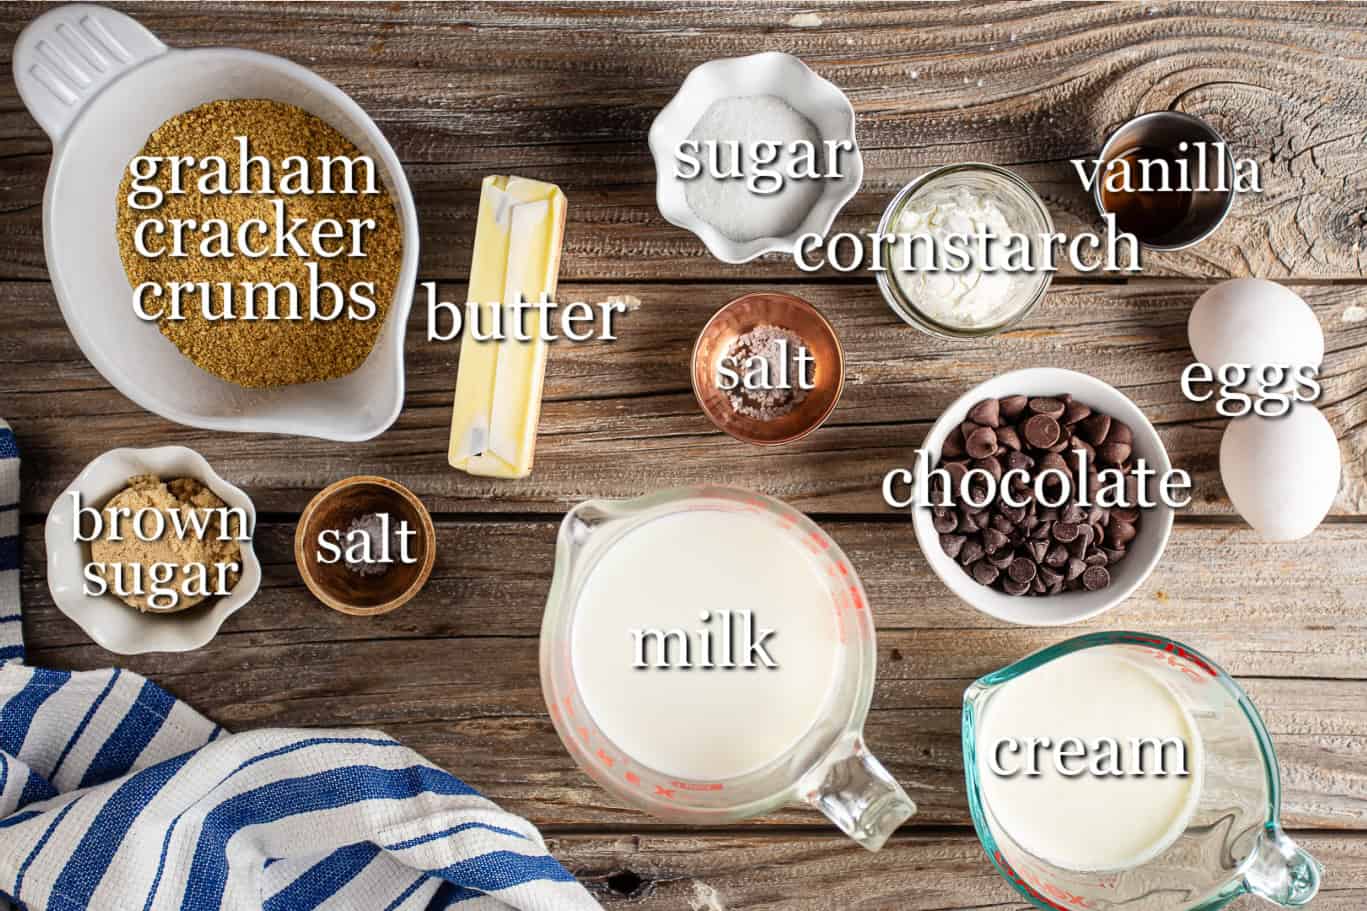 Ingredients for making chocolate pudding pie, with text labels.